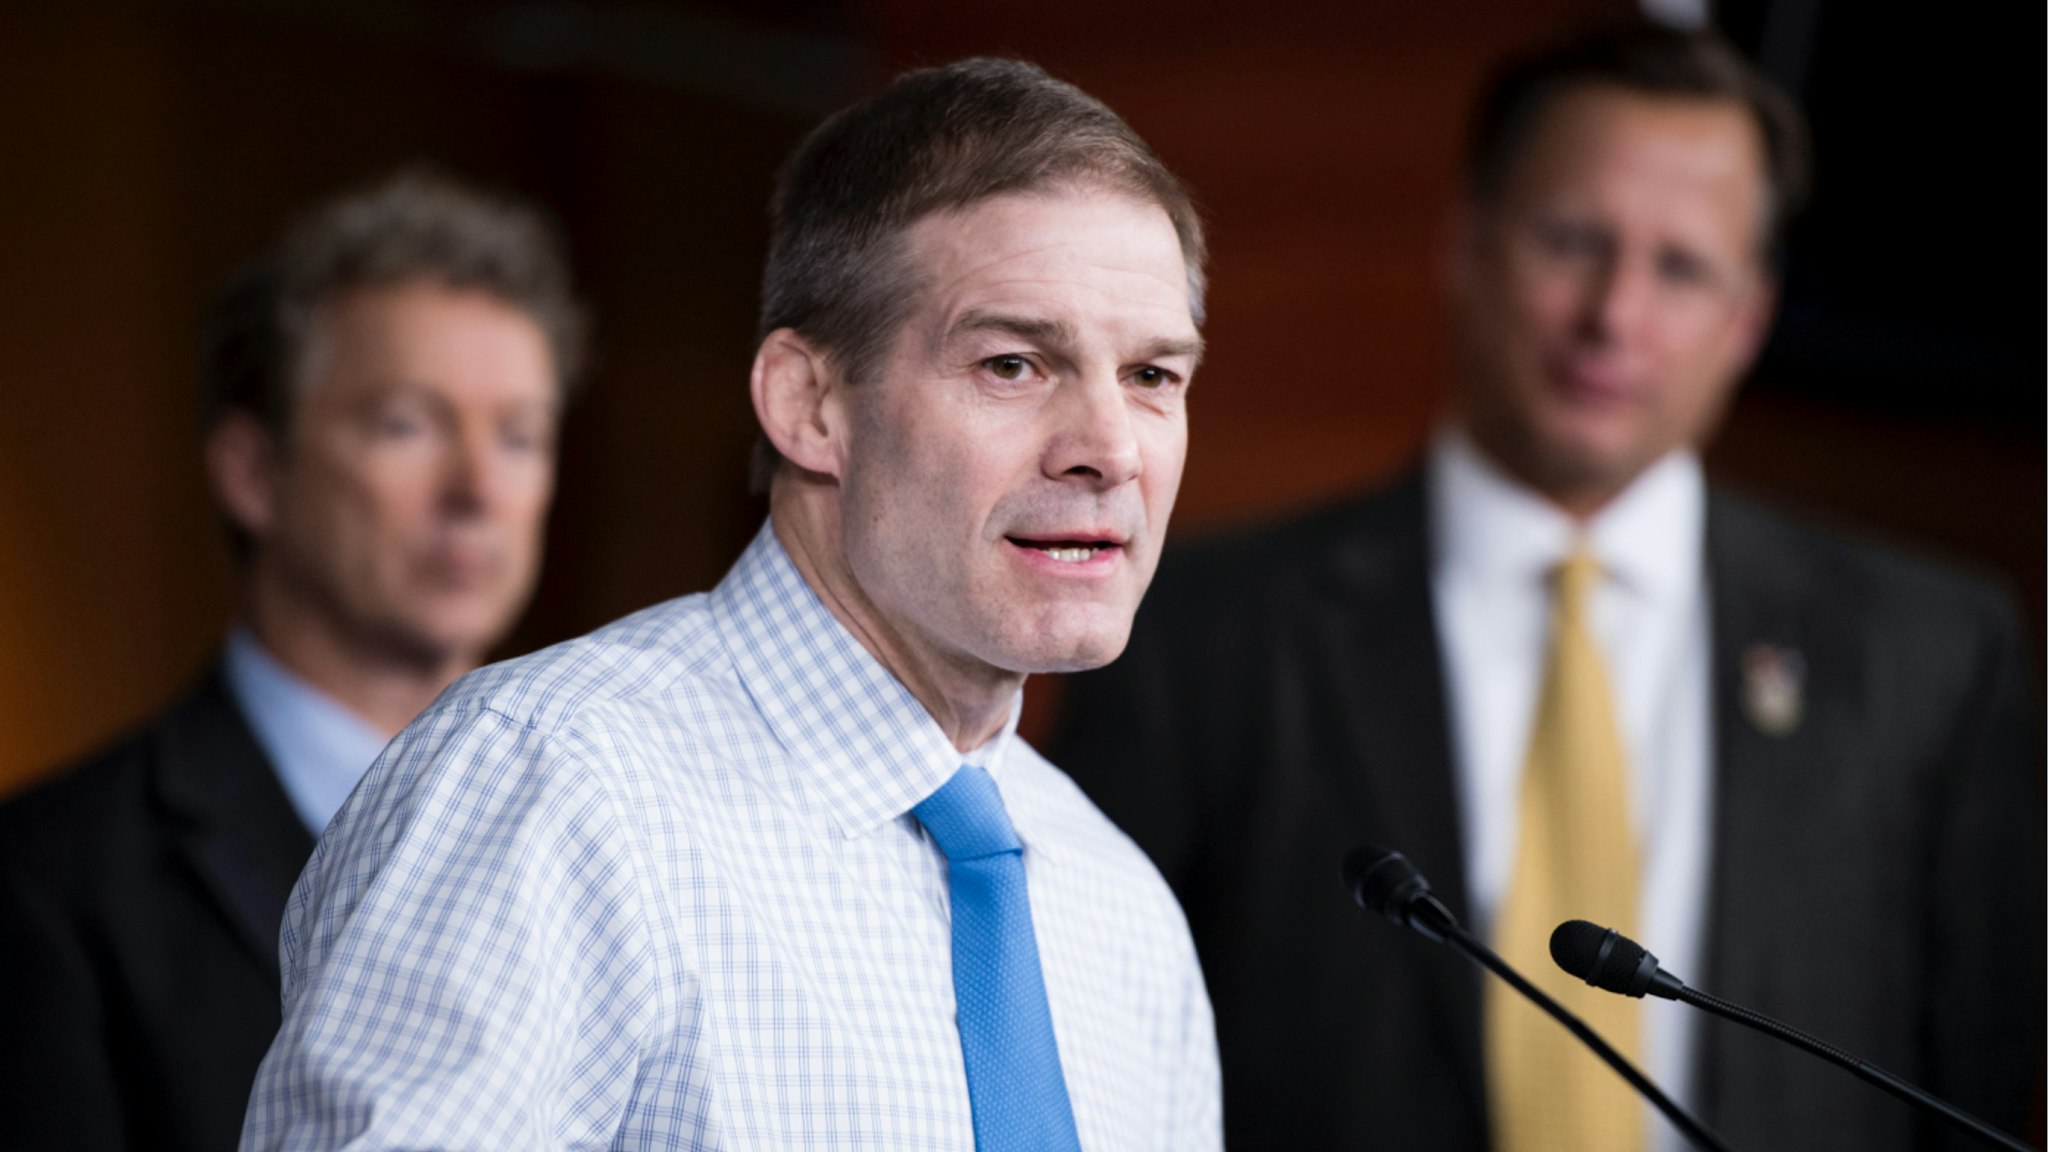 Rep. Jim Jordan, R-Ohio, speaks during the House Freedom Caucus news conference on Affordable Care Act replacement legislation on Wednesday, Feb. 15, 2017.